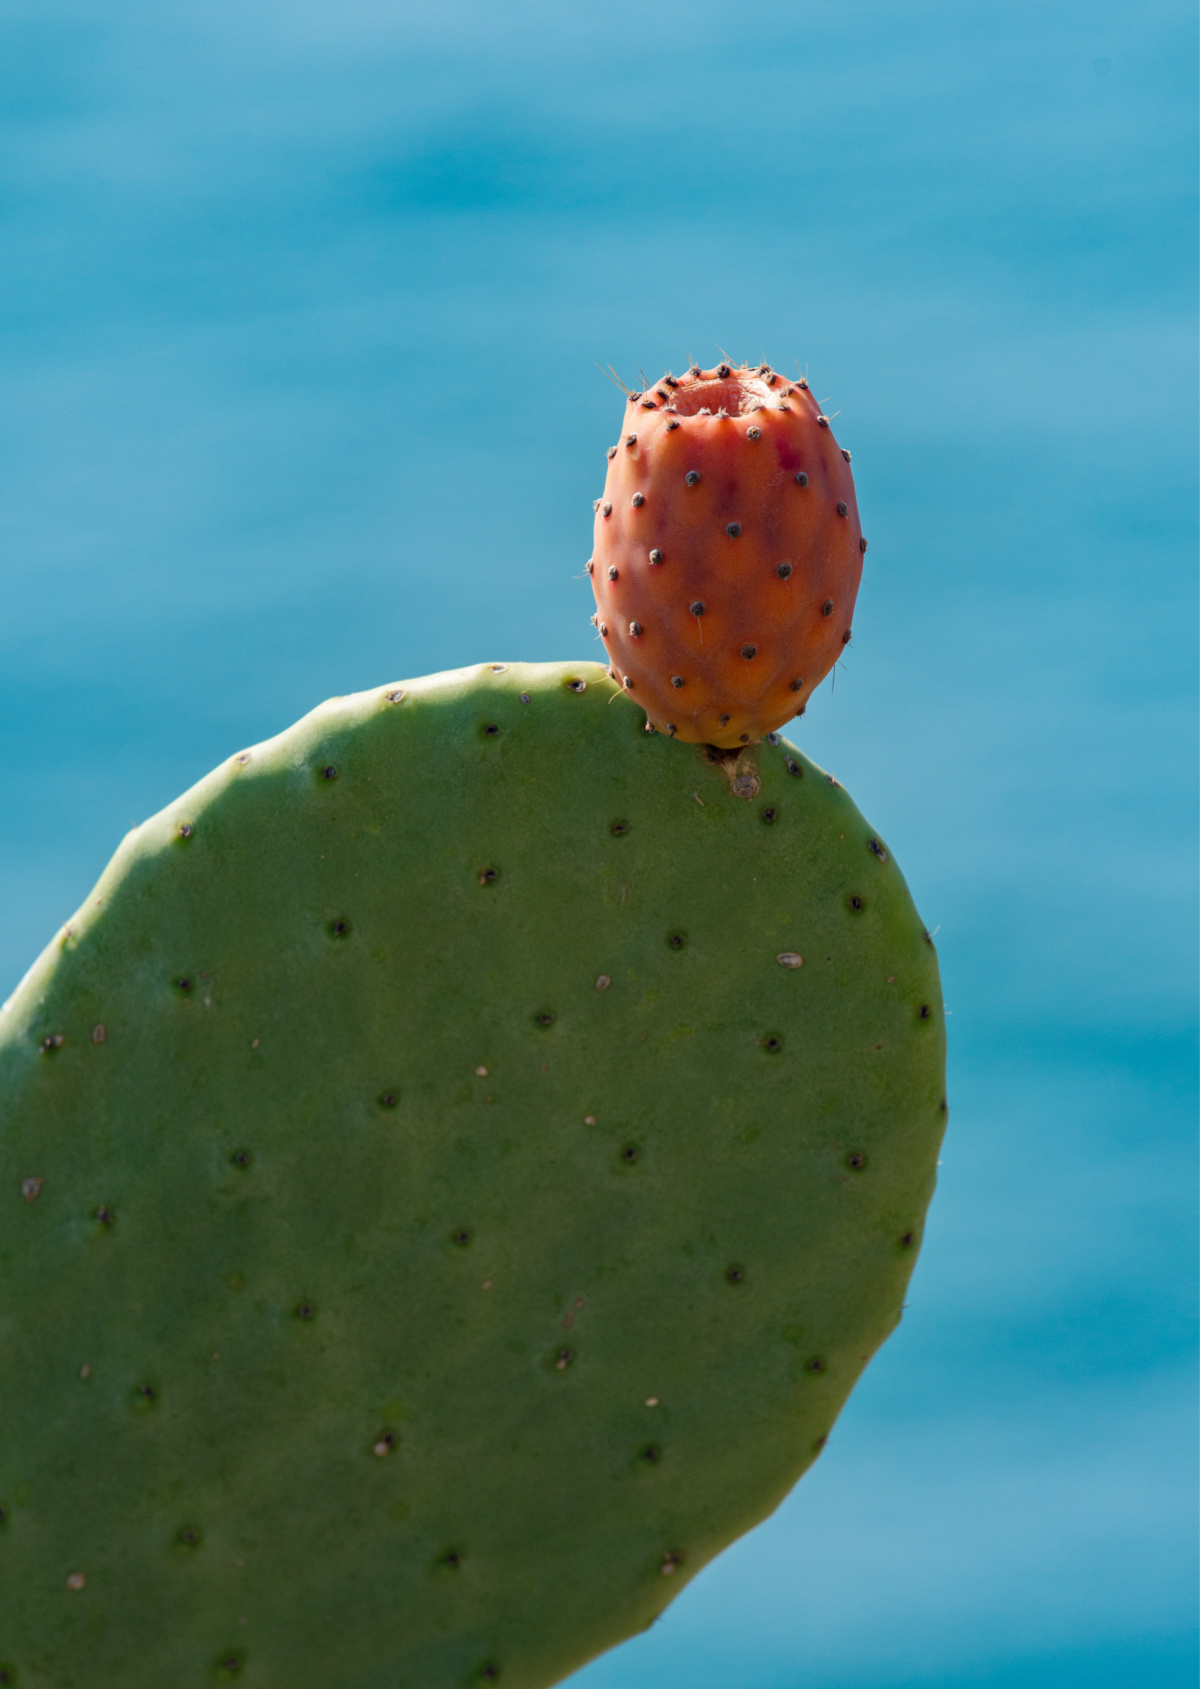 cactus pad with prickly pear fruit attached